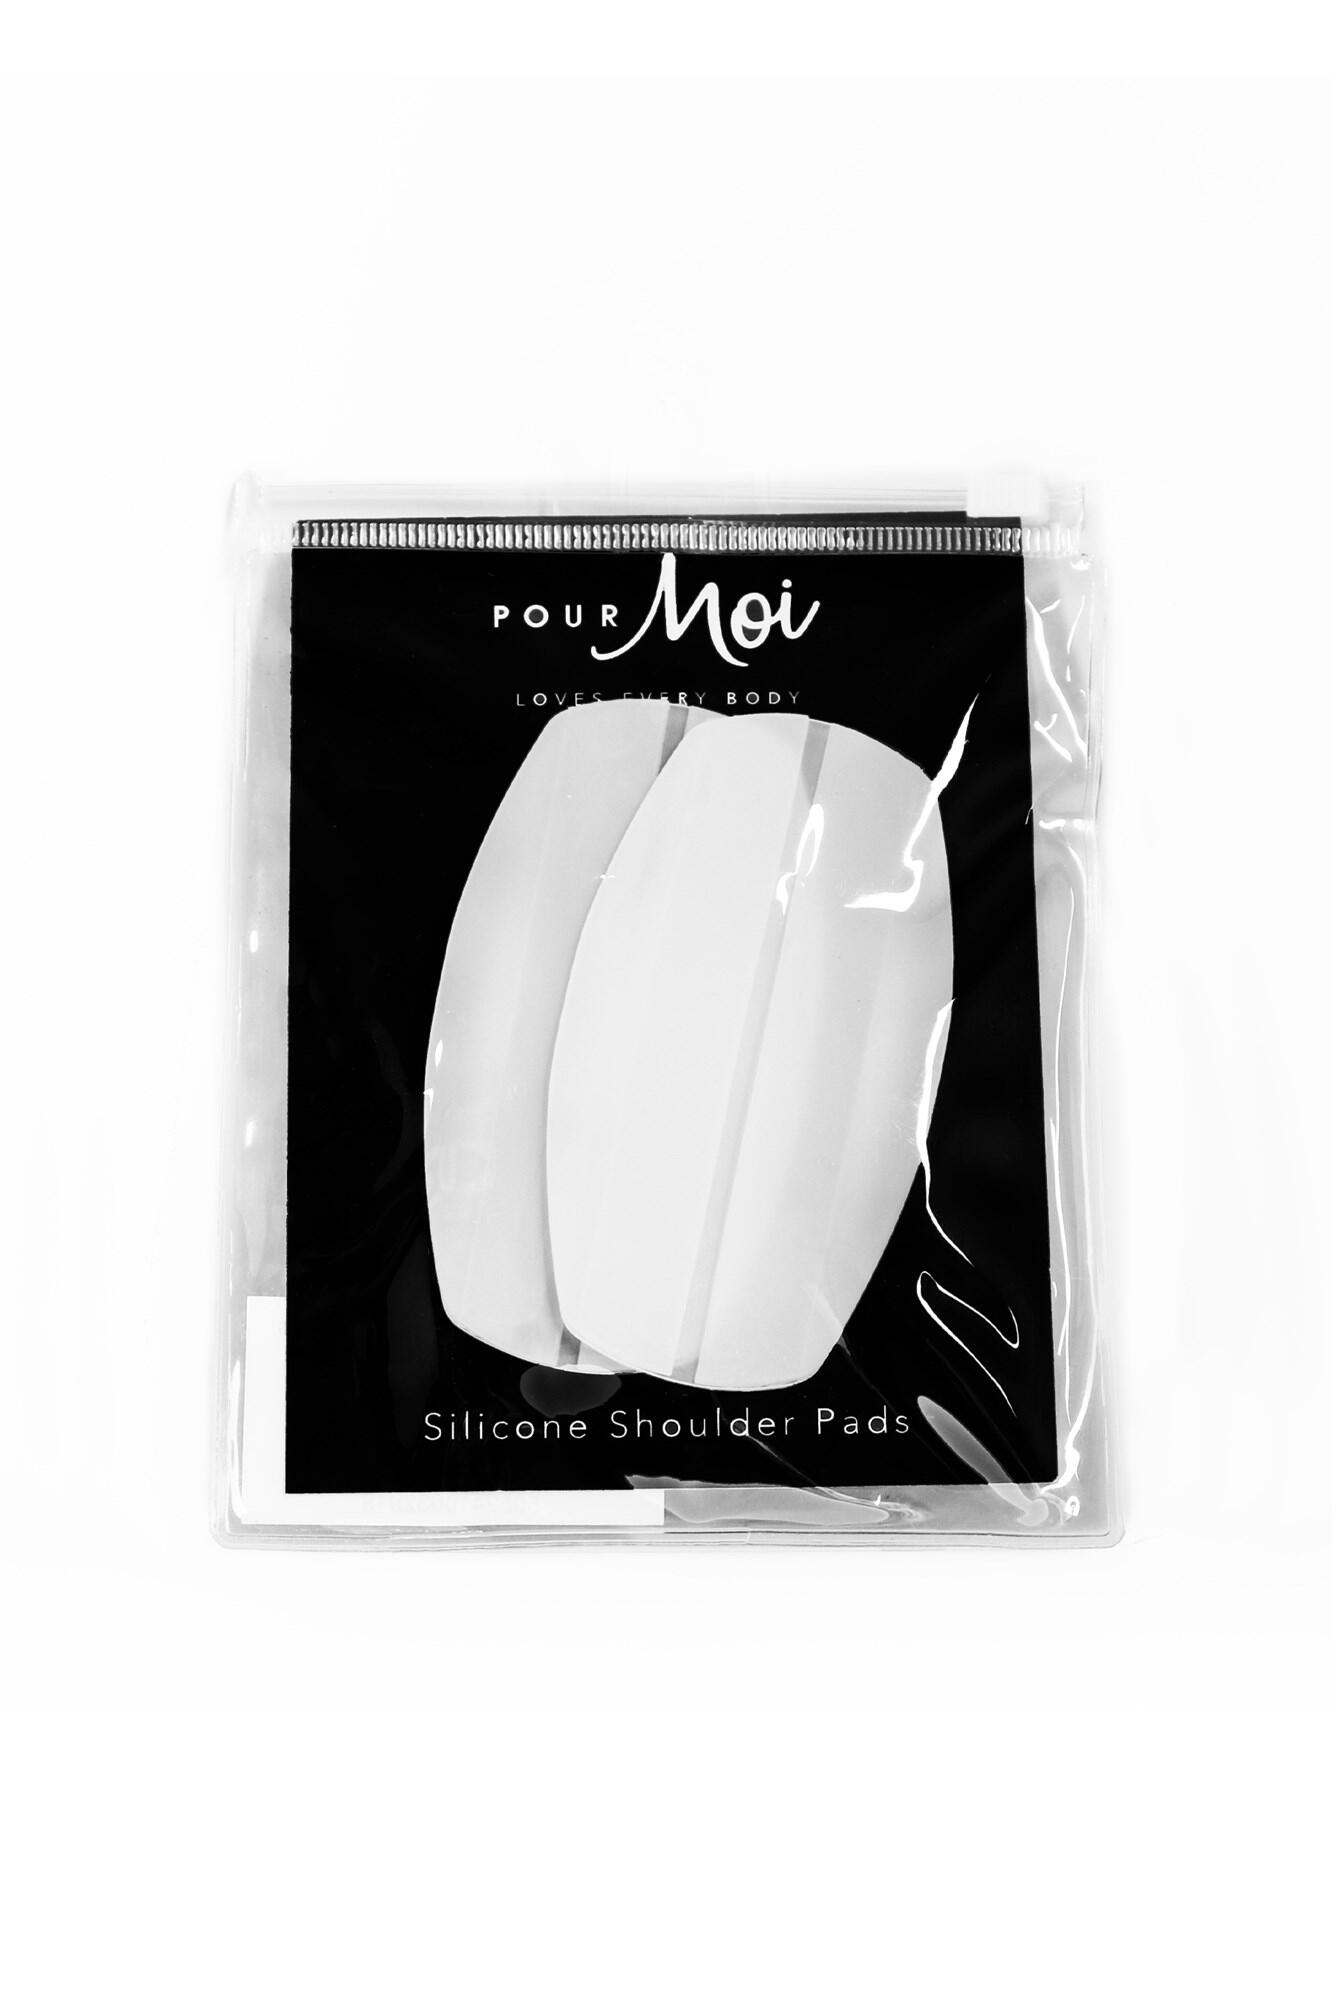 Tuenmall  1 pair Clear Colour Silicone Under Bra Strap Pads